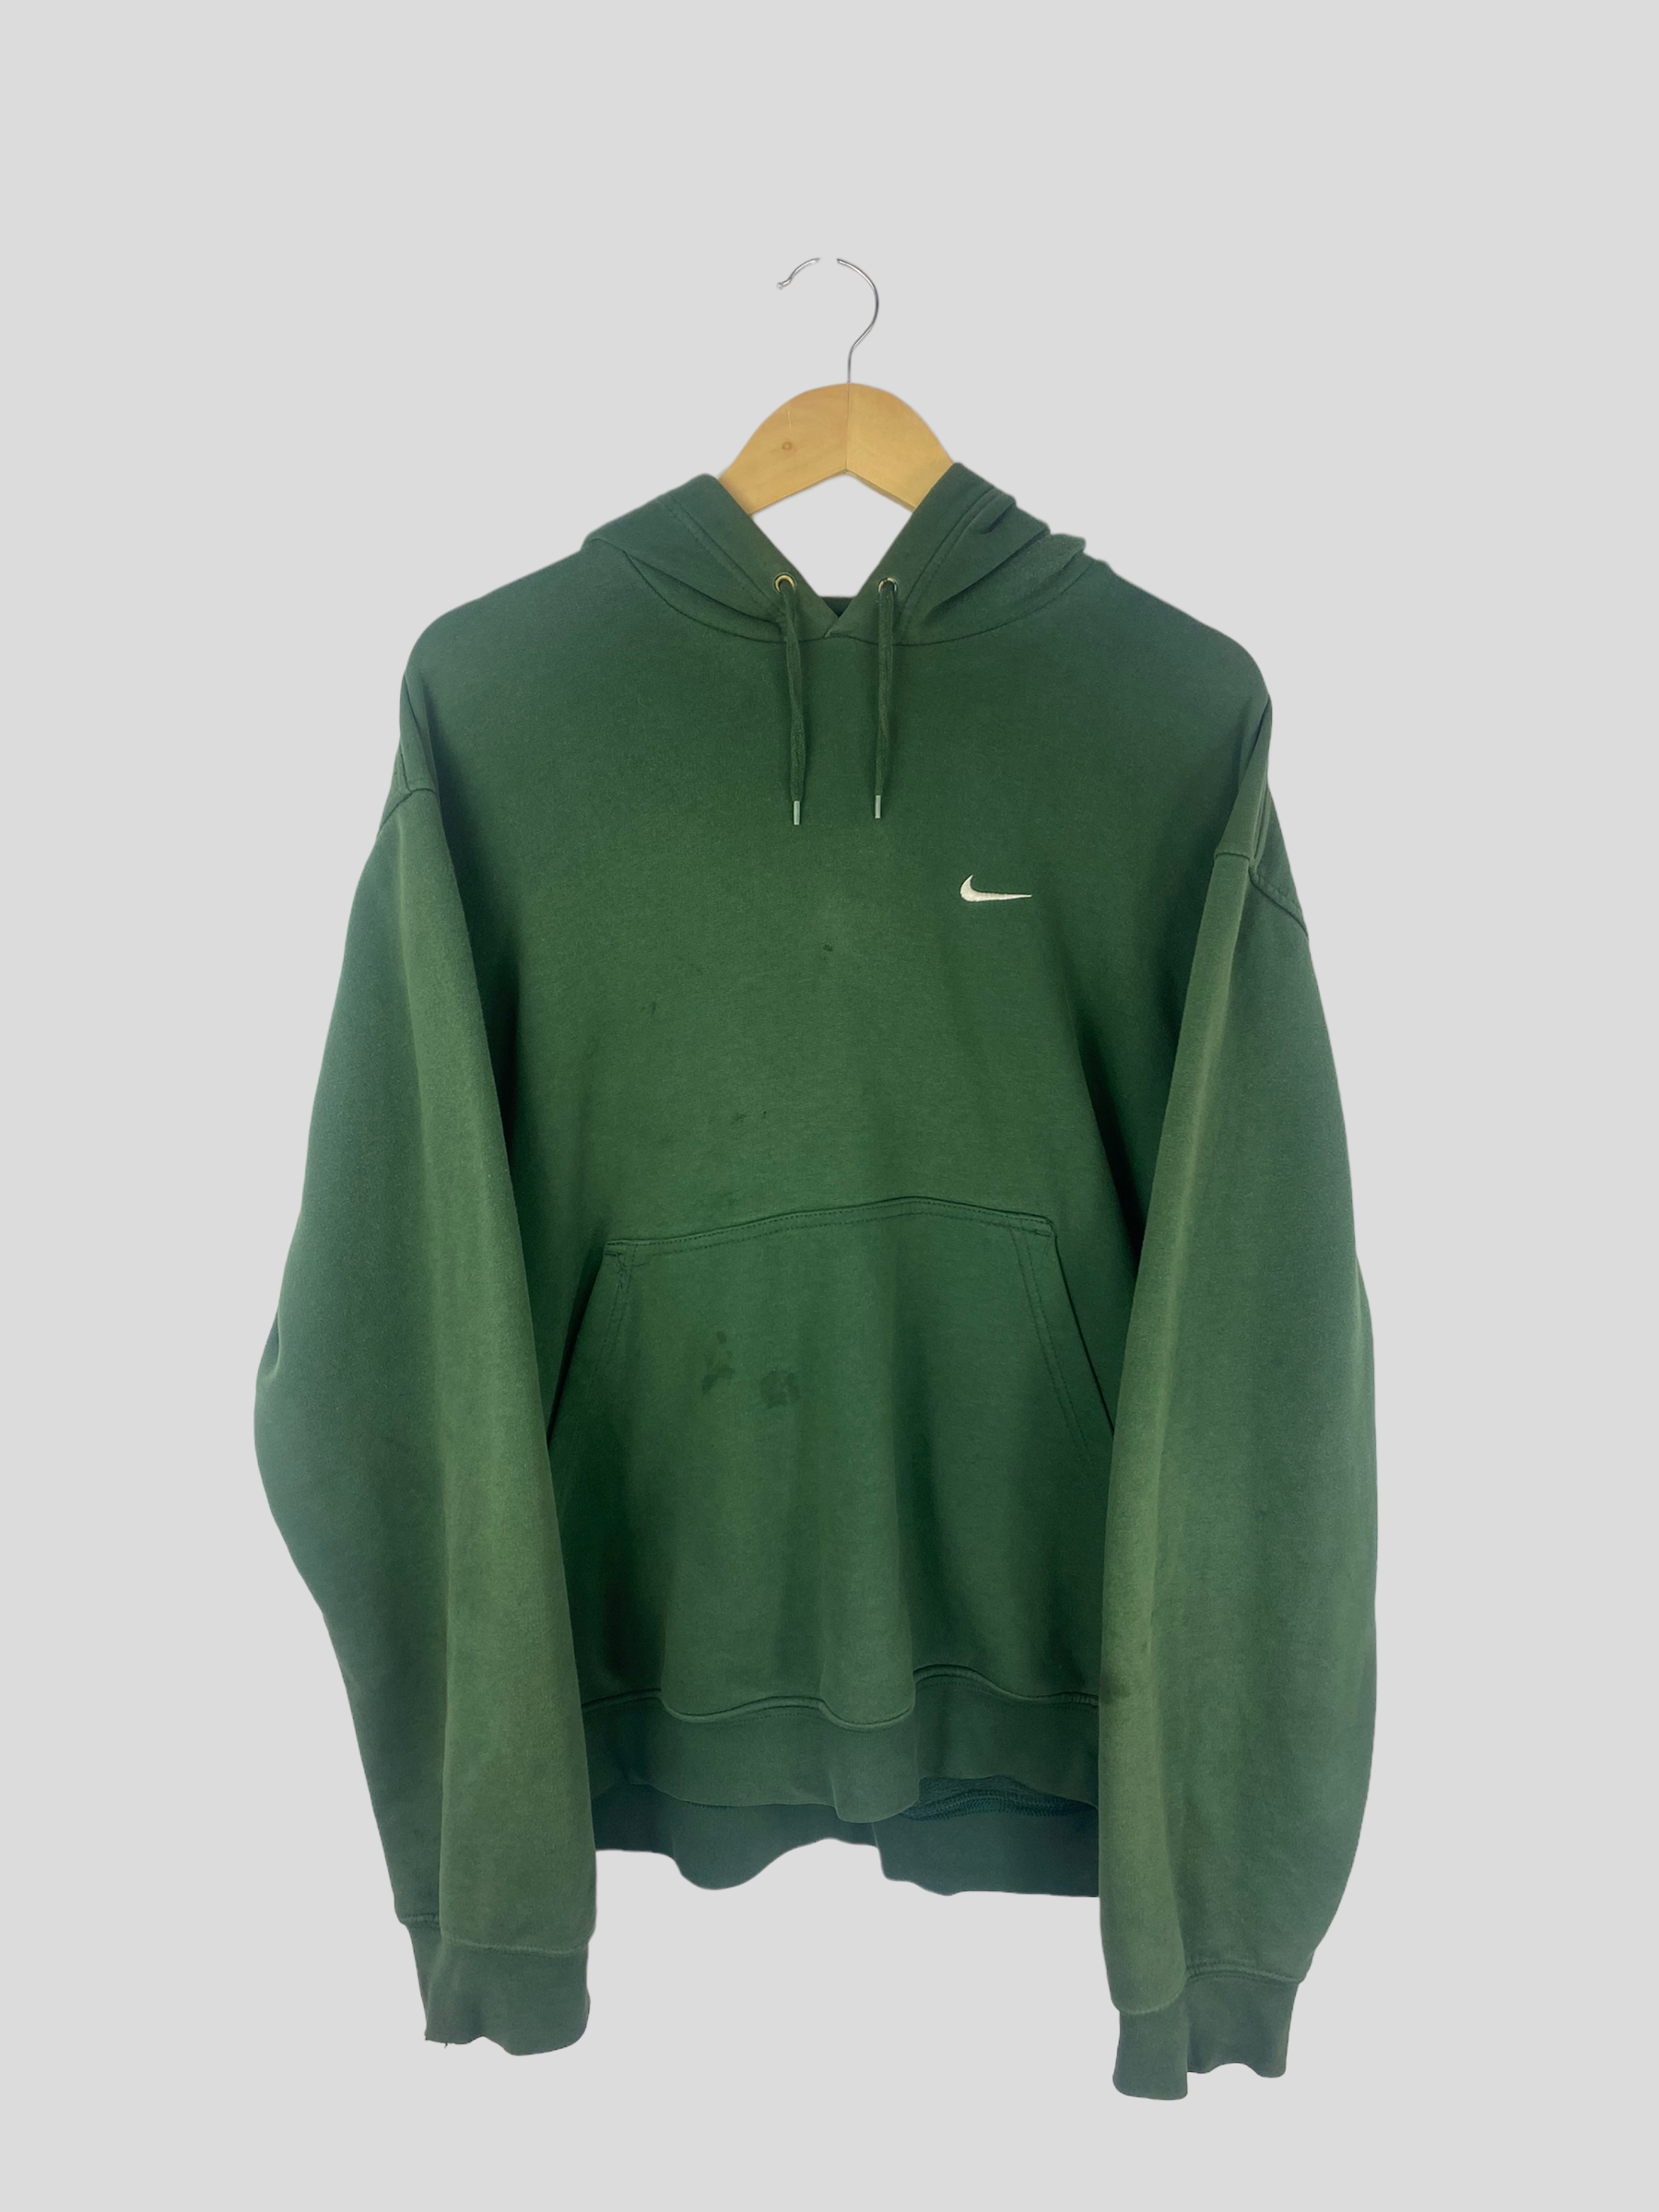 Nike Hoodie With Embroidered Swoosh Clothing Company